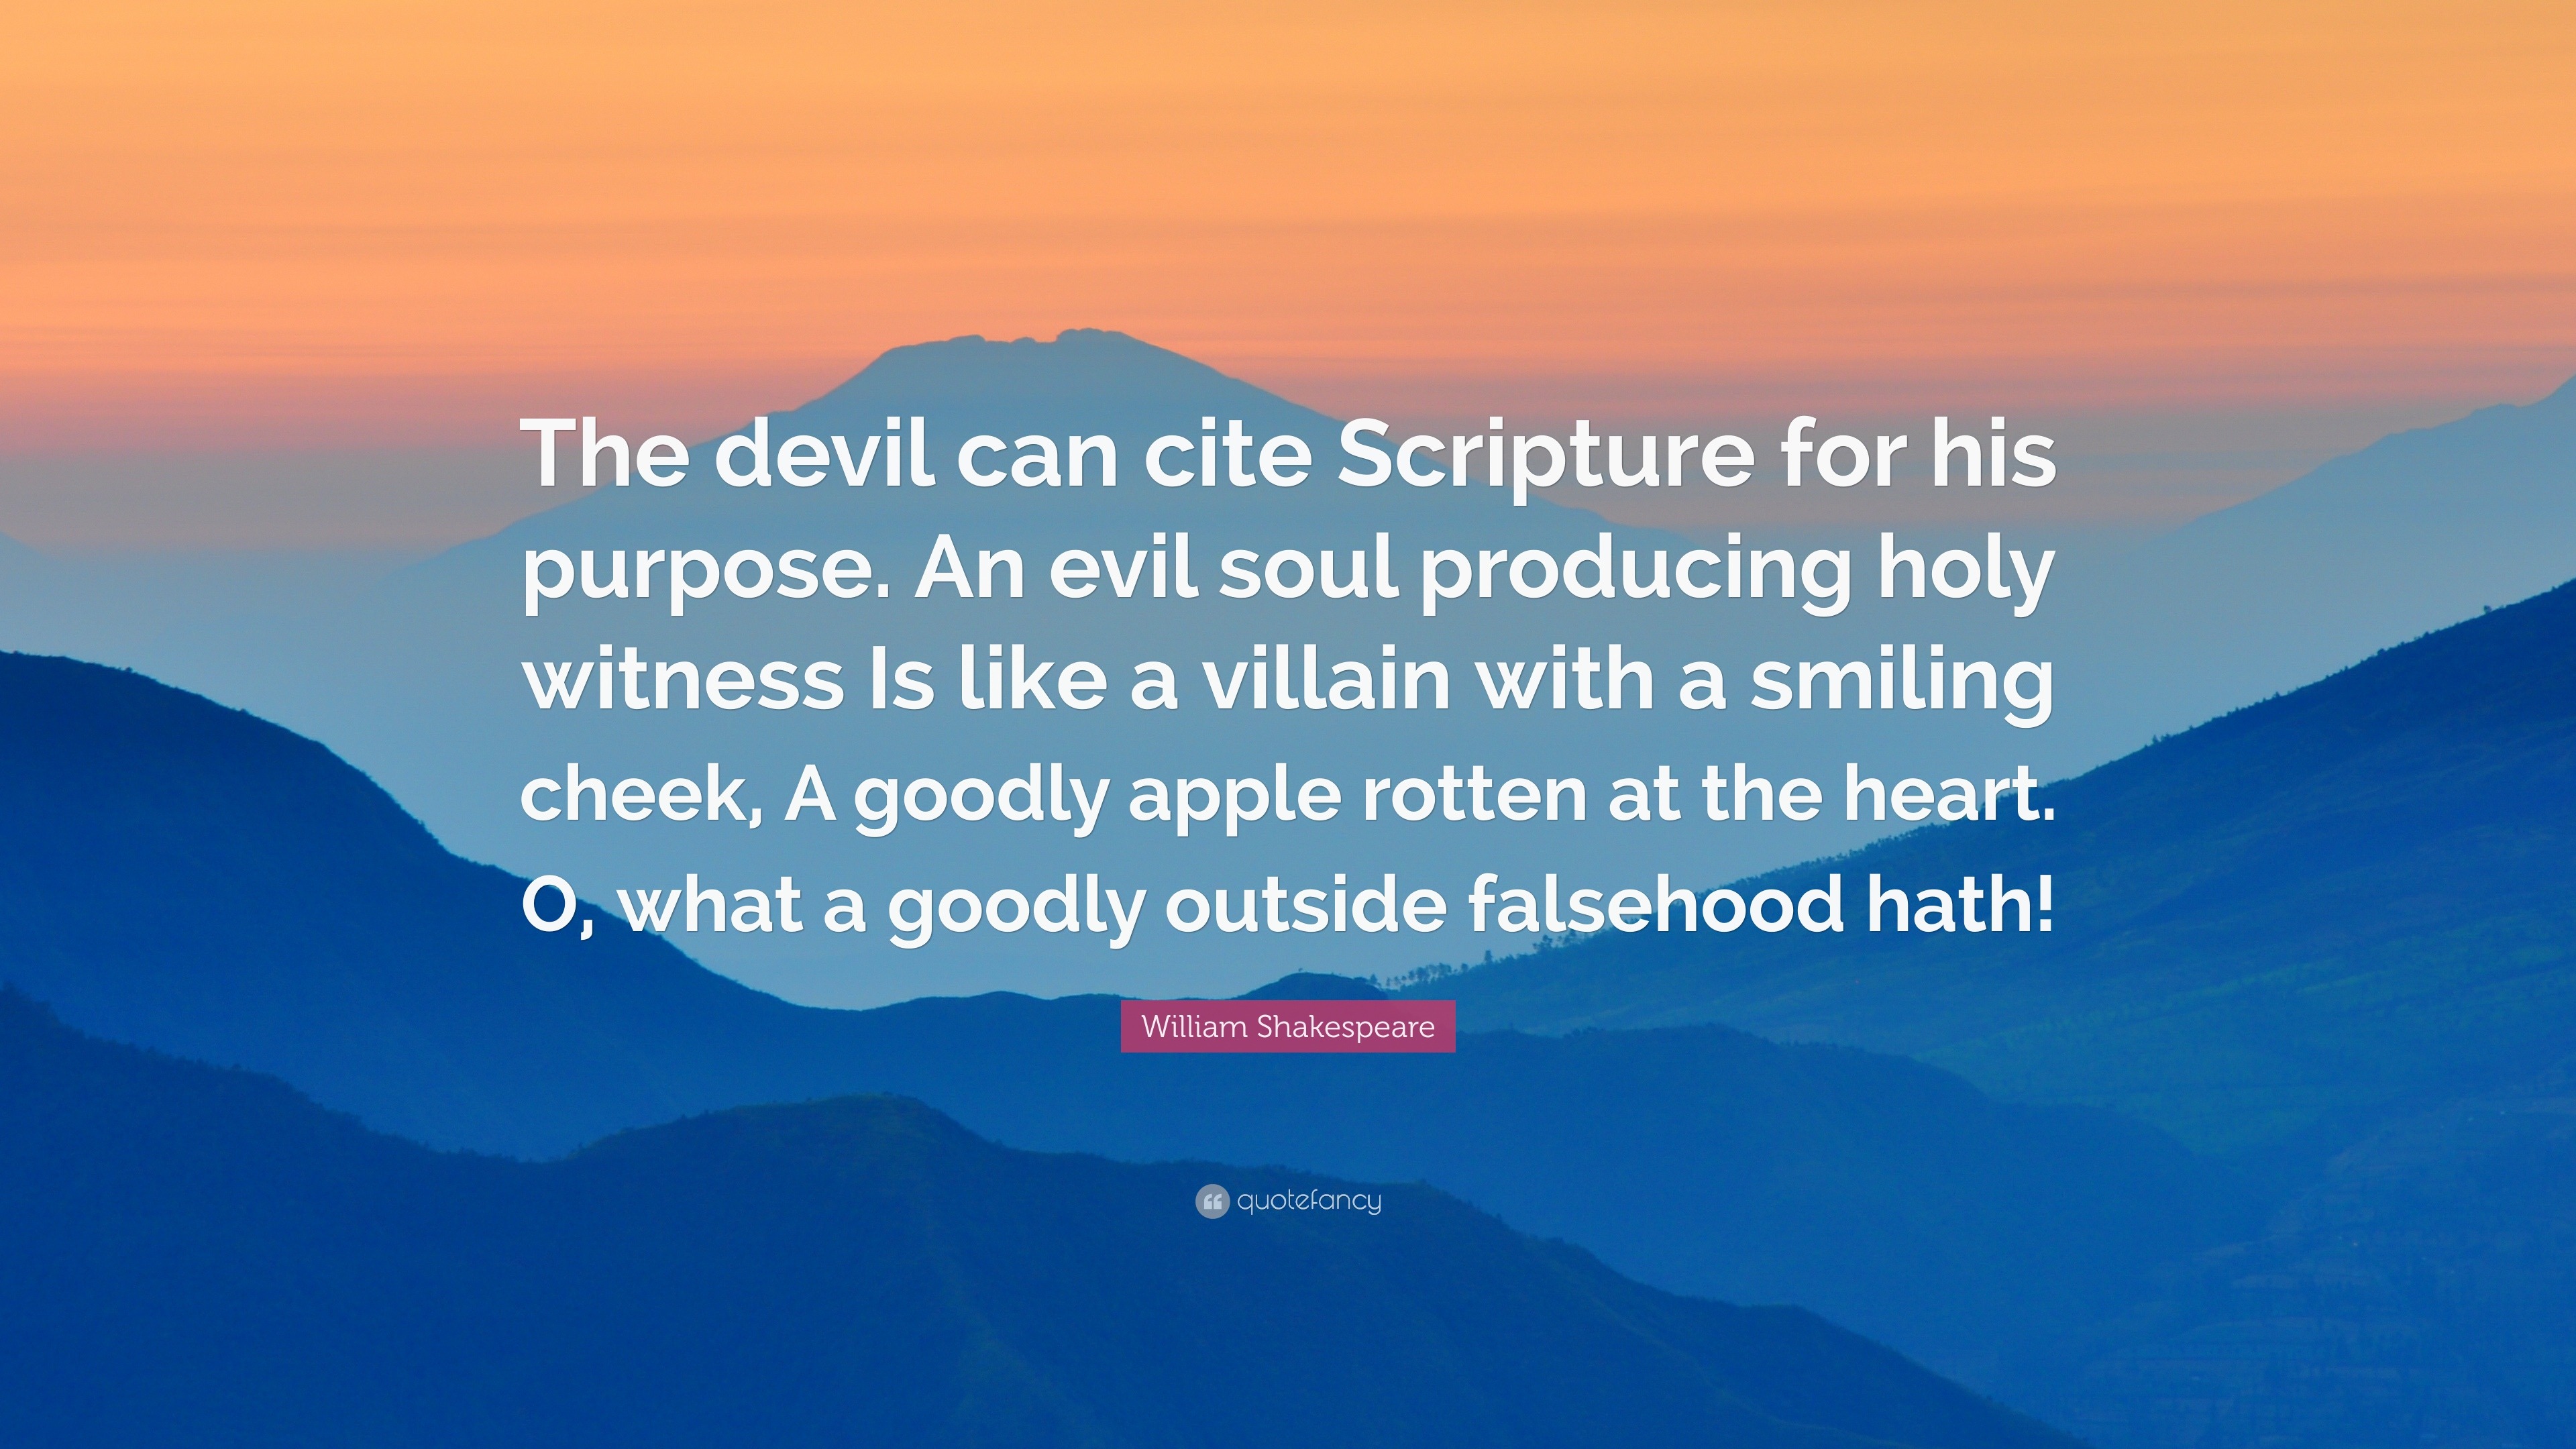 William Shakespeare Quote The Devil Can Cite Scripture For His Purpose An Evil Soul Producing Holy Witness Is Like A Villain With A Smiling Cheek